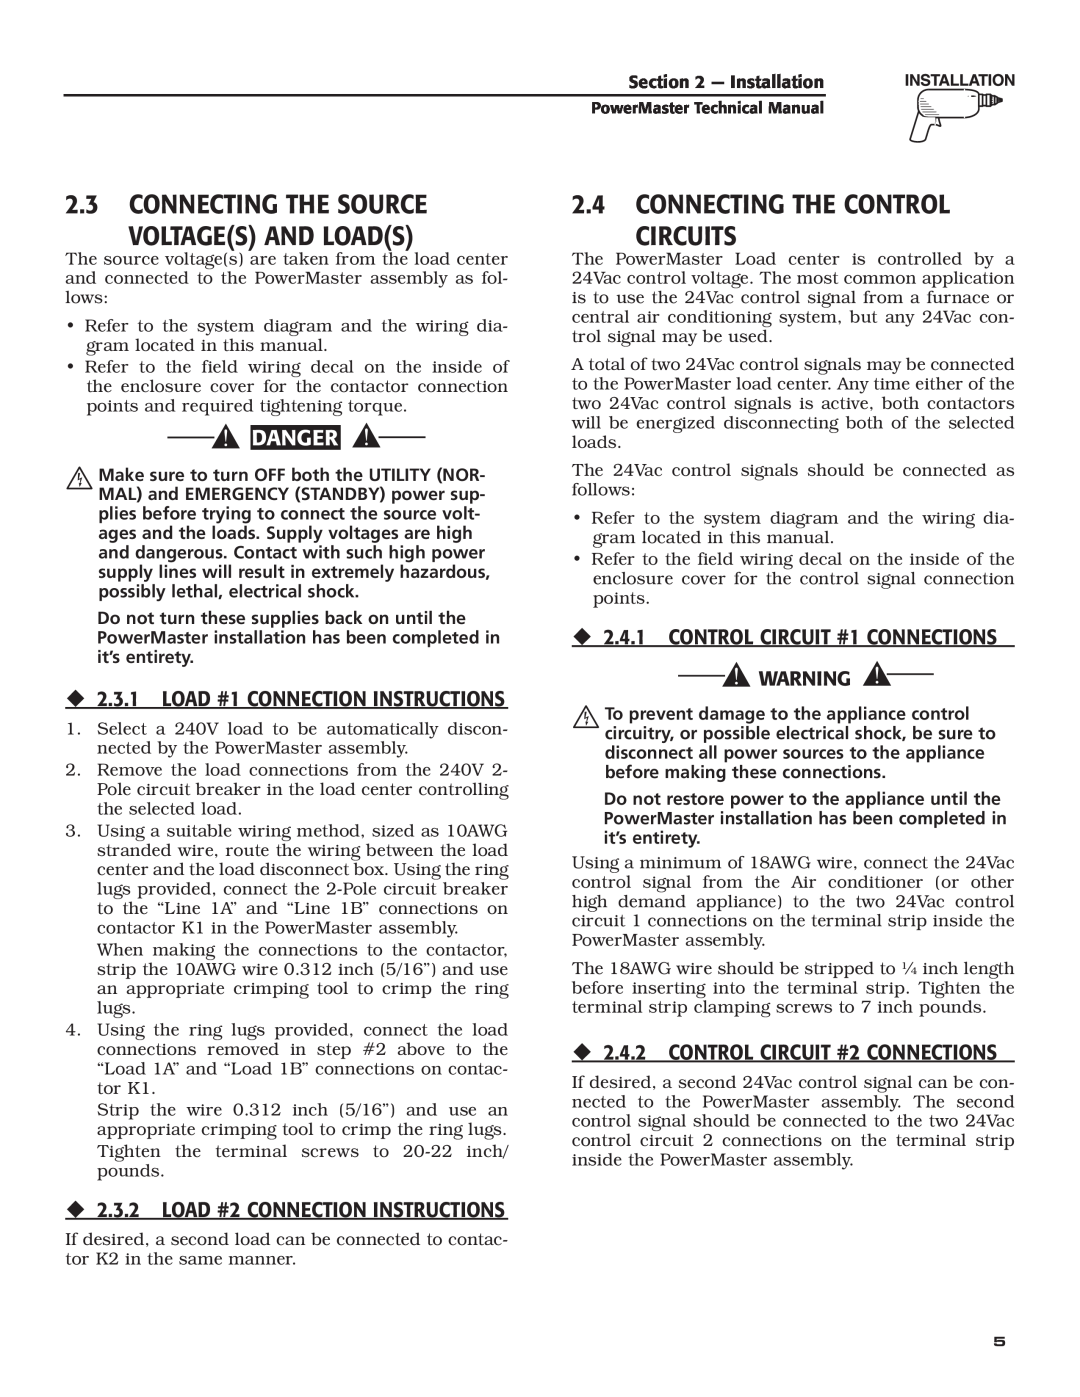 Generac Generator technical manual Connecting The Source Voltages And Loads, Connecting The Control Circuits, Danger 